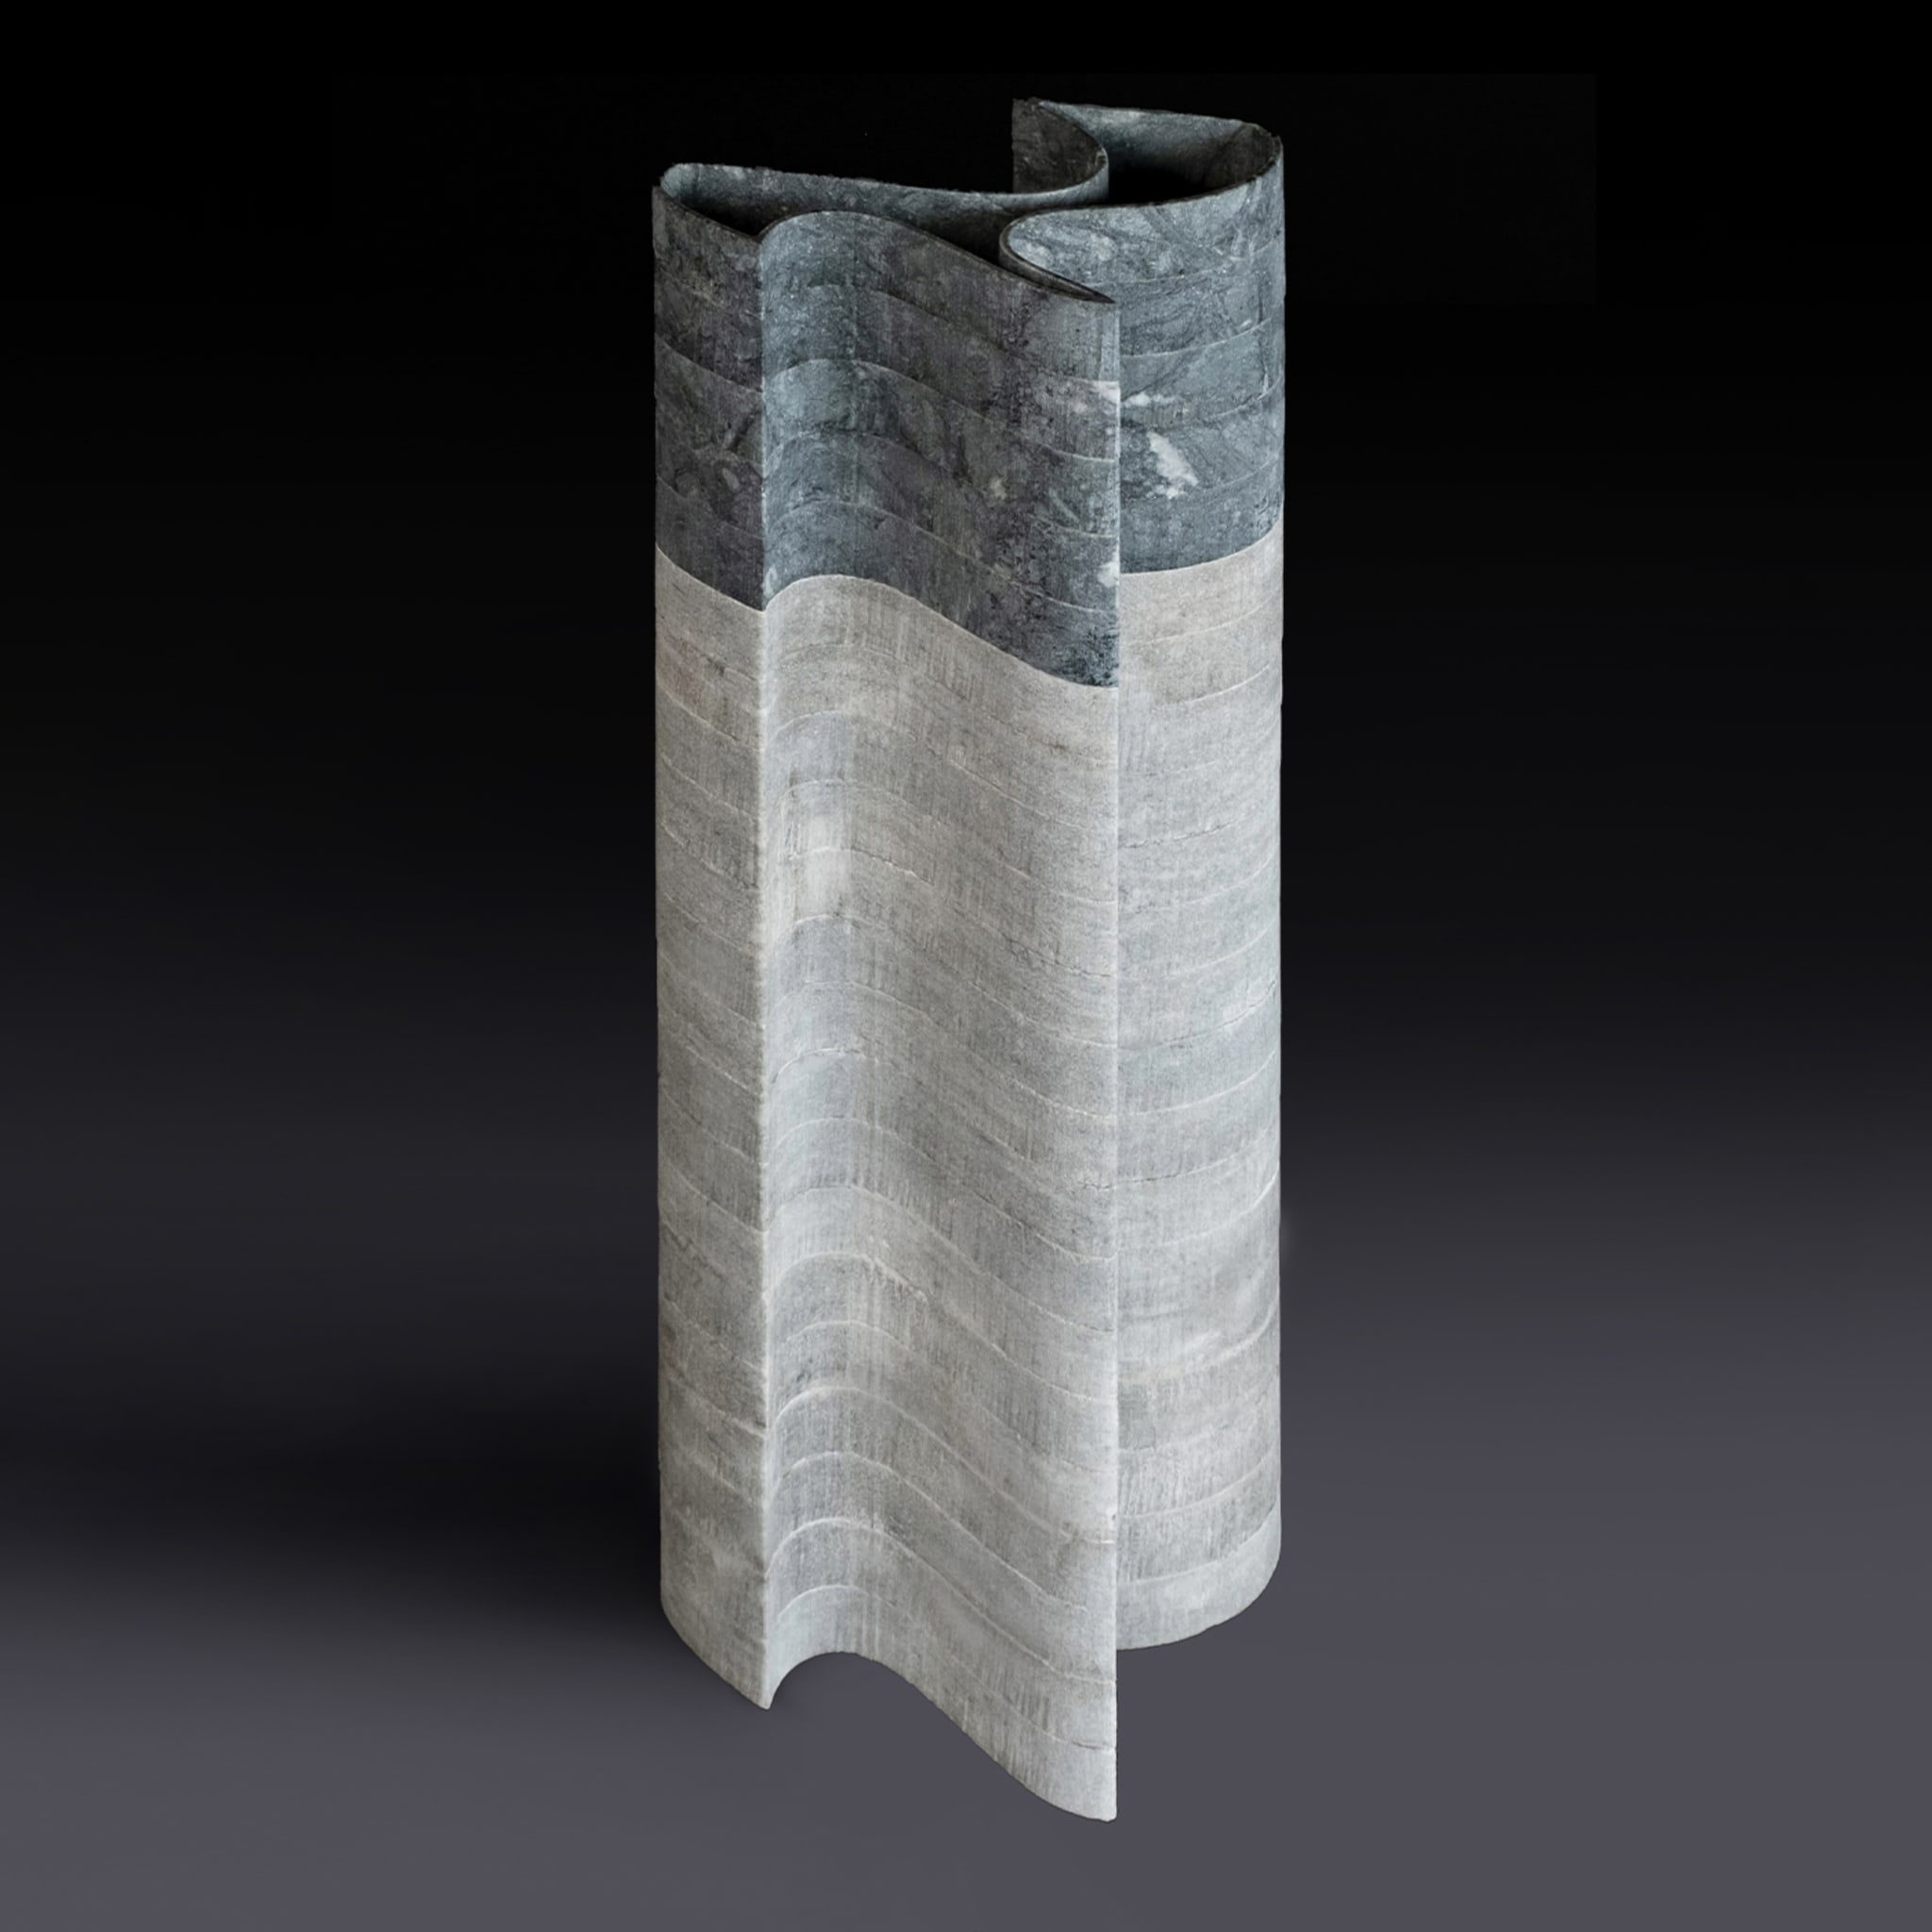 Stripes Vase Lagoon Green Marble #2 by Paolo Ulian - Alternative view 1